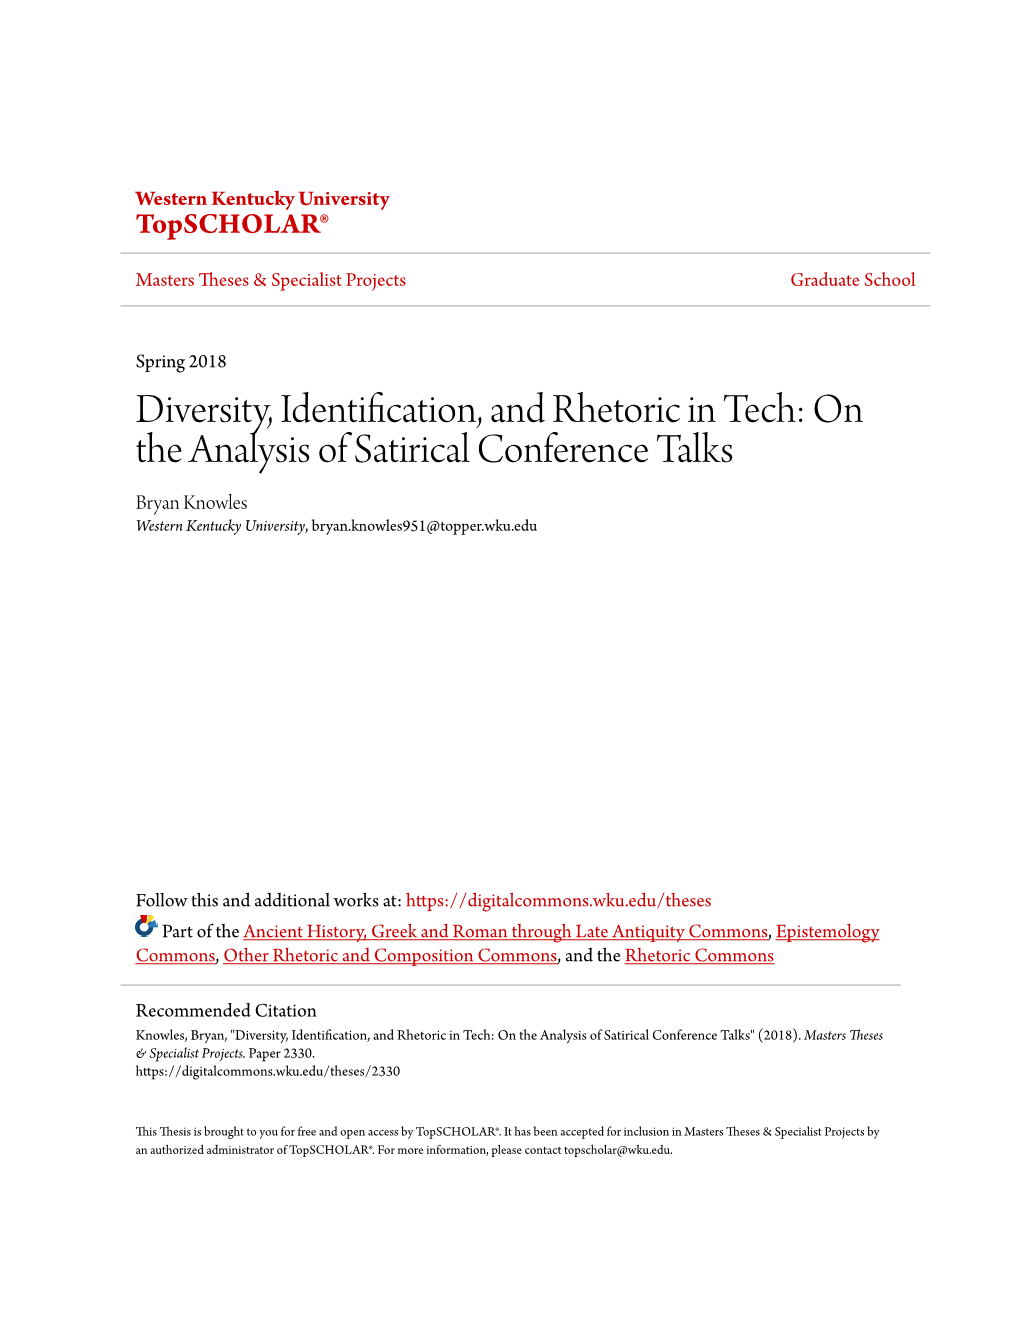 Diversity, Identification, and Rhetoric in Tech: on the Analysis of Satirical Conference Talks